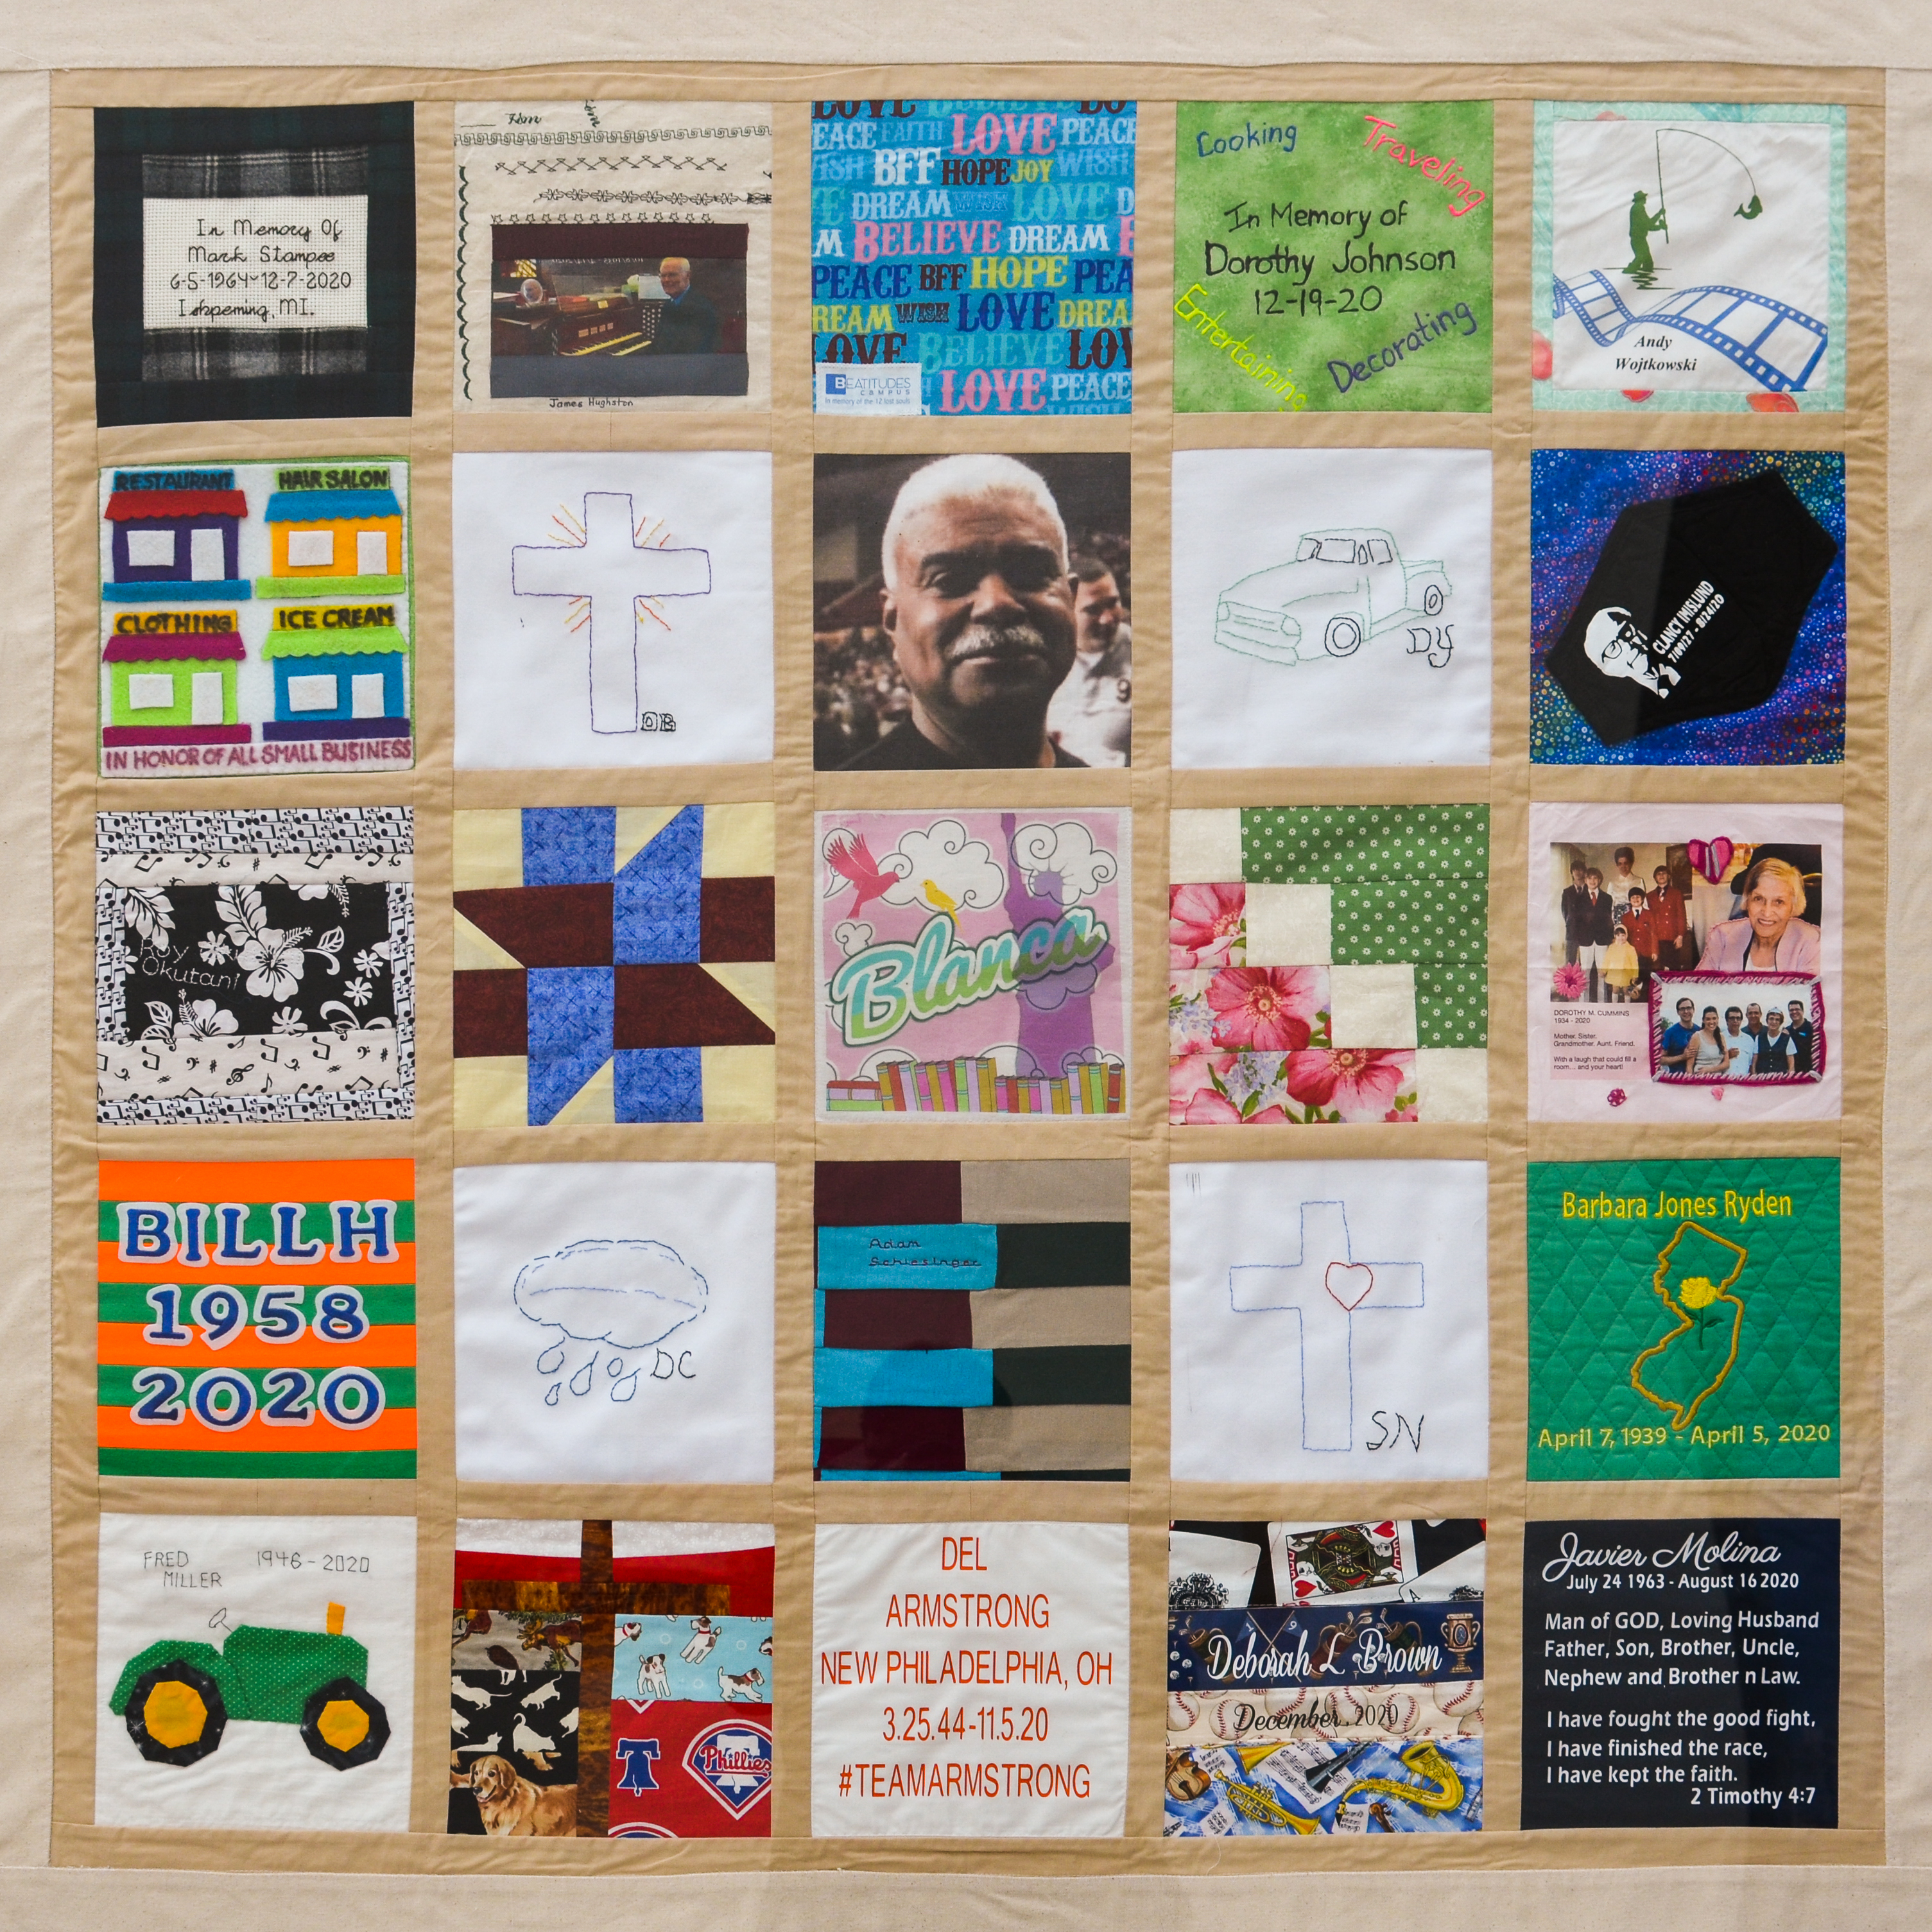 This colorful panel of the COVID-19 memorial quilt features 25 homemade fabric squares sewn in a five-by-five grid